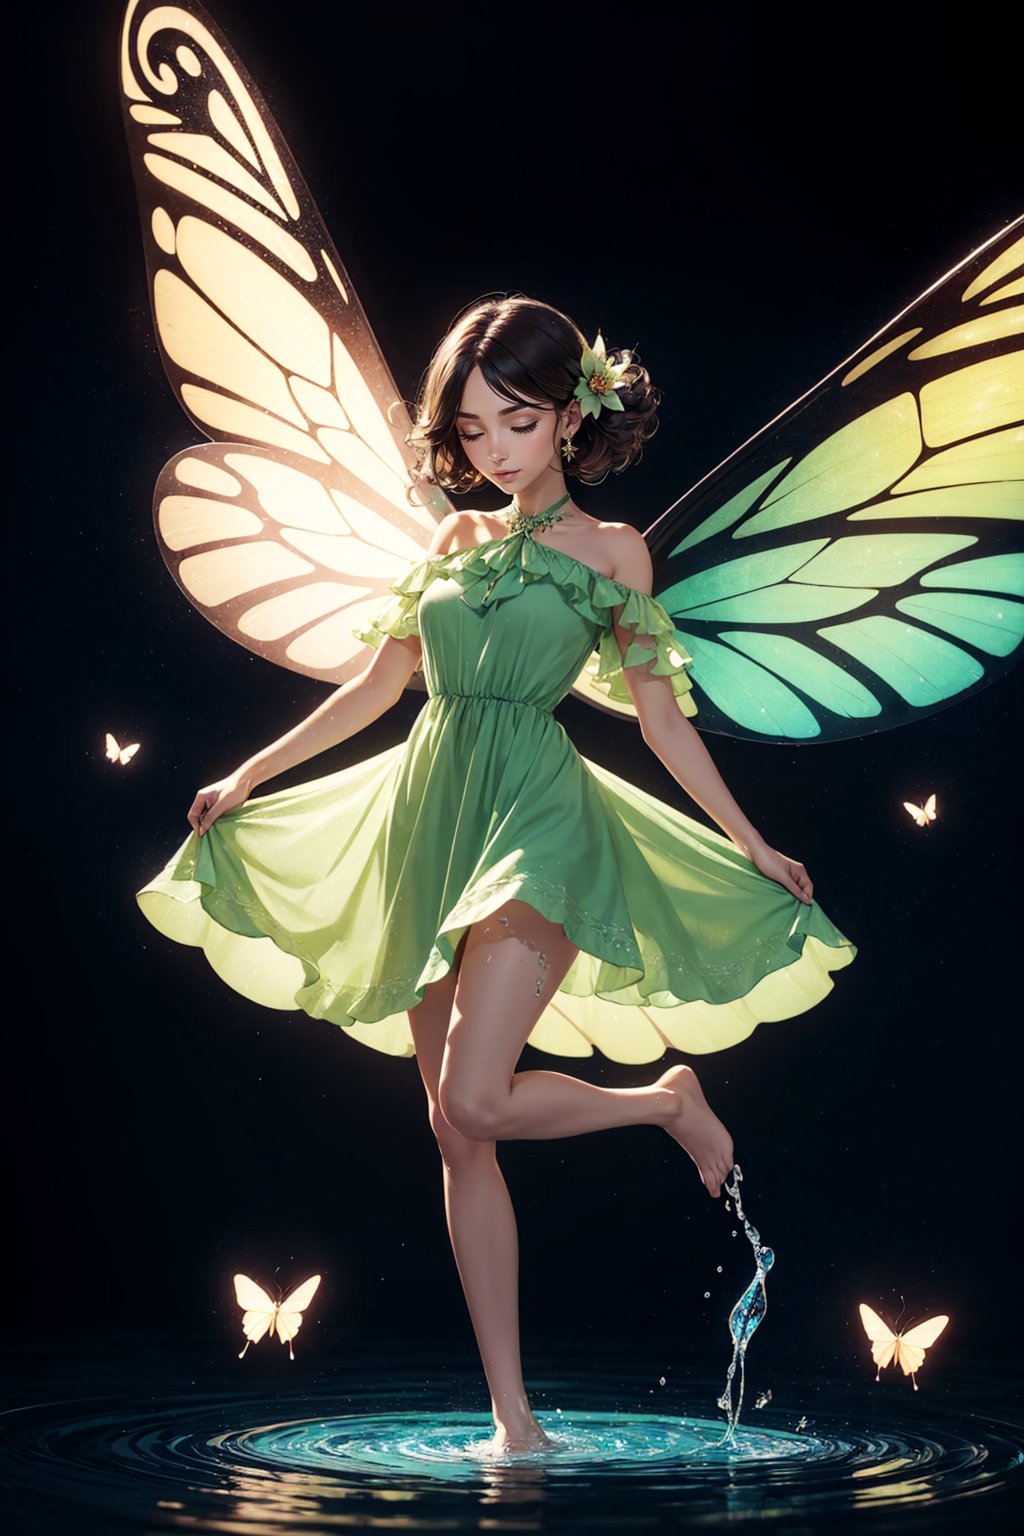 (1girl), fairy_wings, flower_hair_ornament, floral_dress, standing, one leg bent, levitation, look at the ground, light halo, brown light around, fractal, power, strength, flying butterflies, no background, transparent dress, light green dress, cute, made up, side view , water source, eyes closed